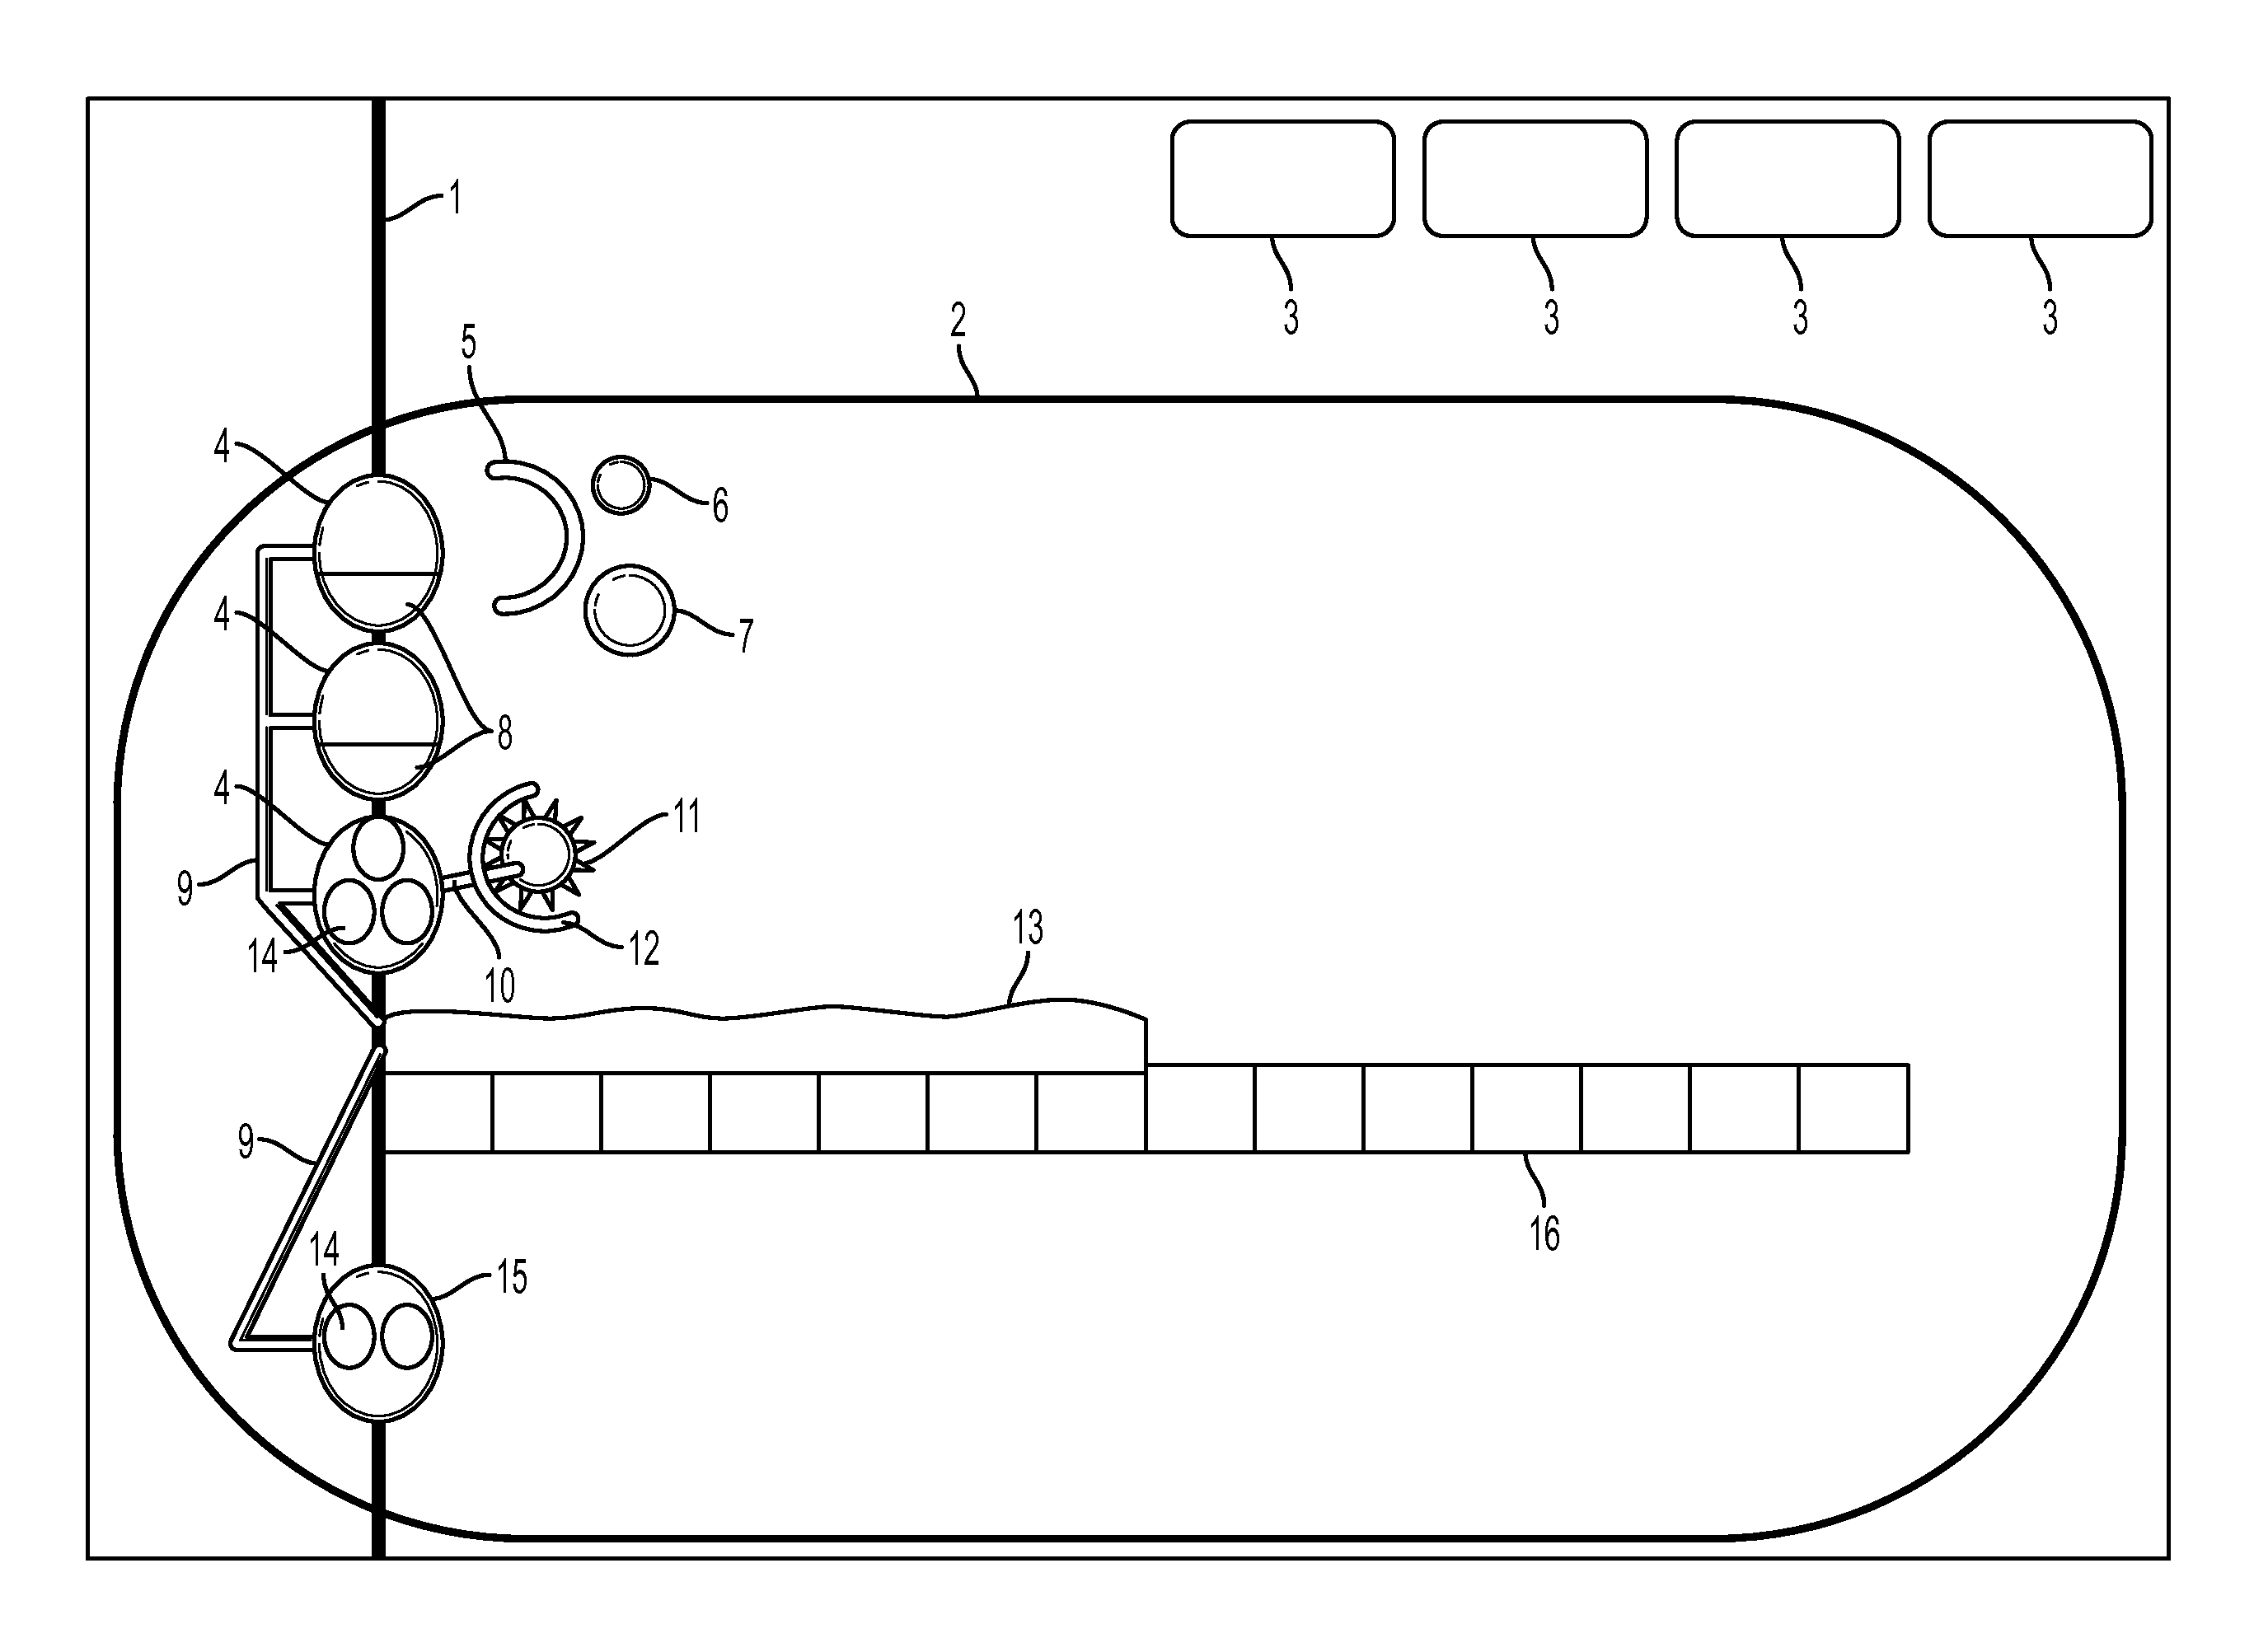 Systems and methods for resource planning using animation